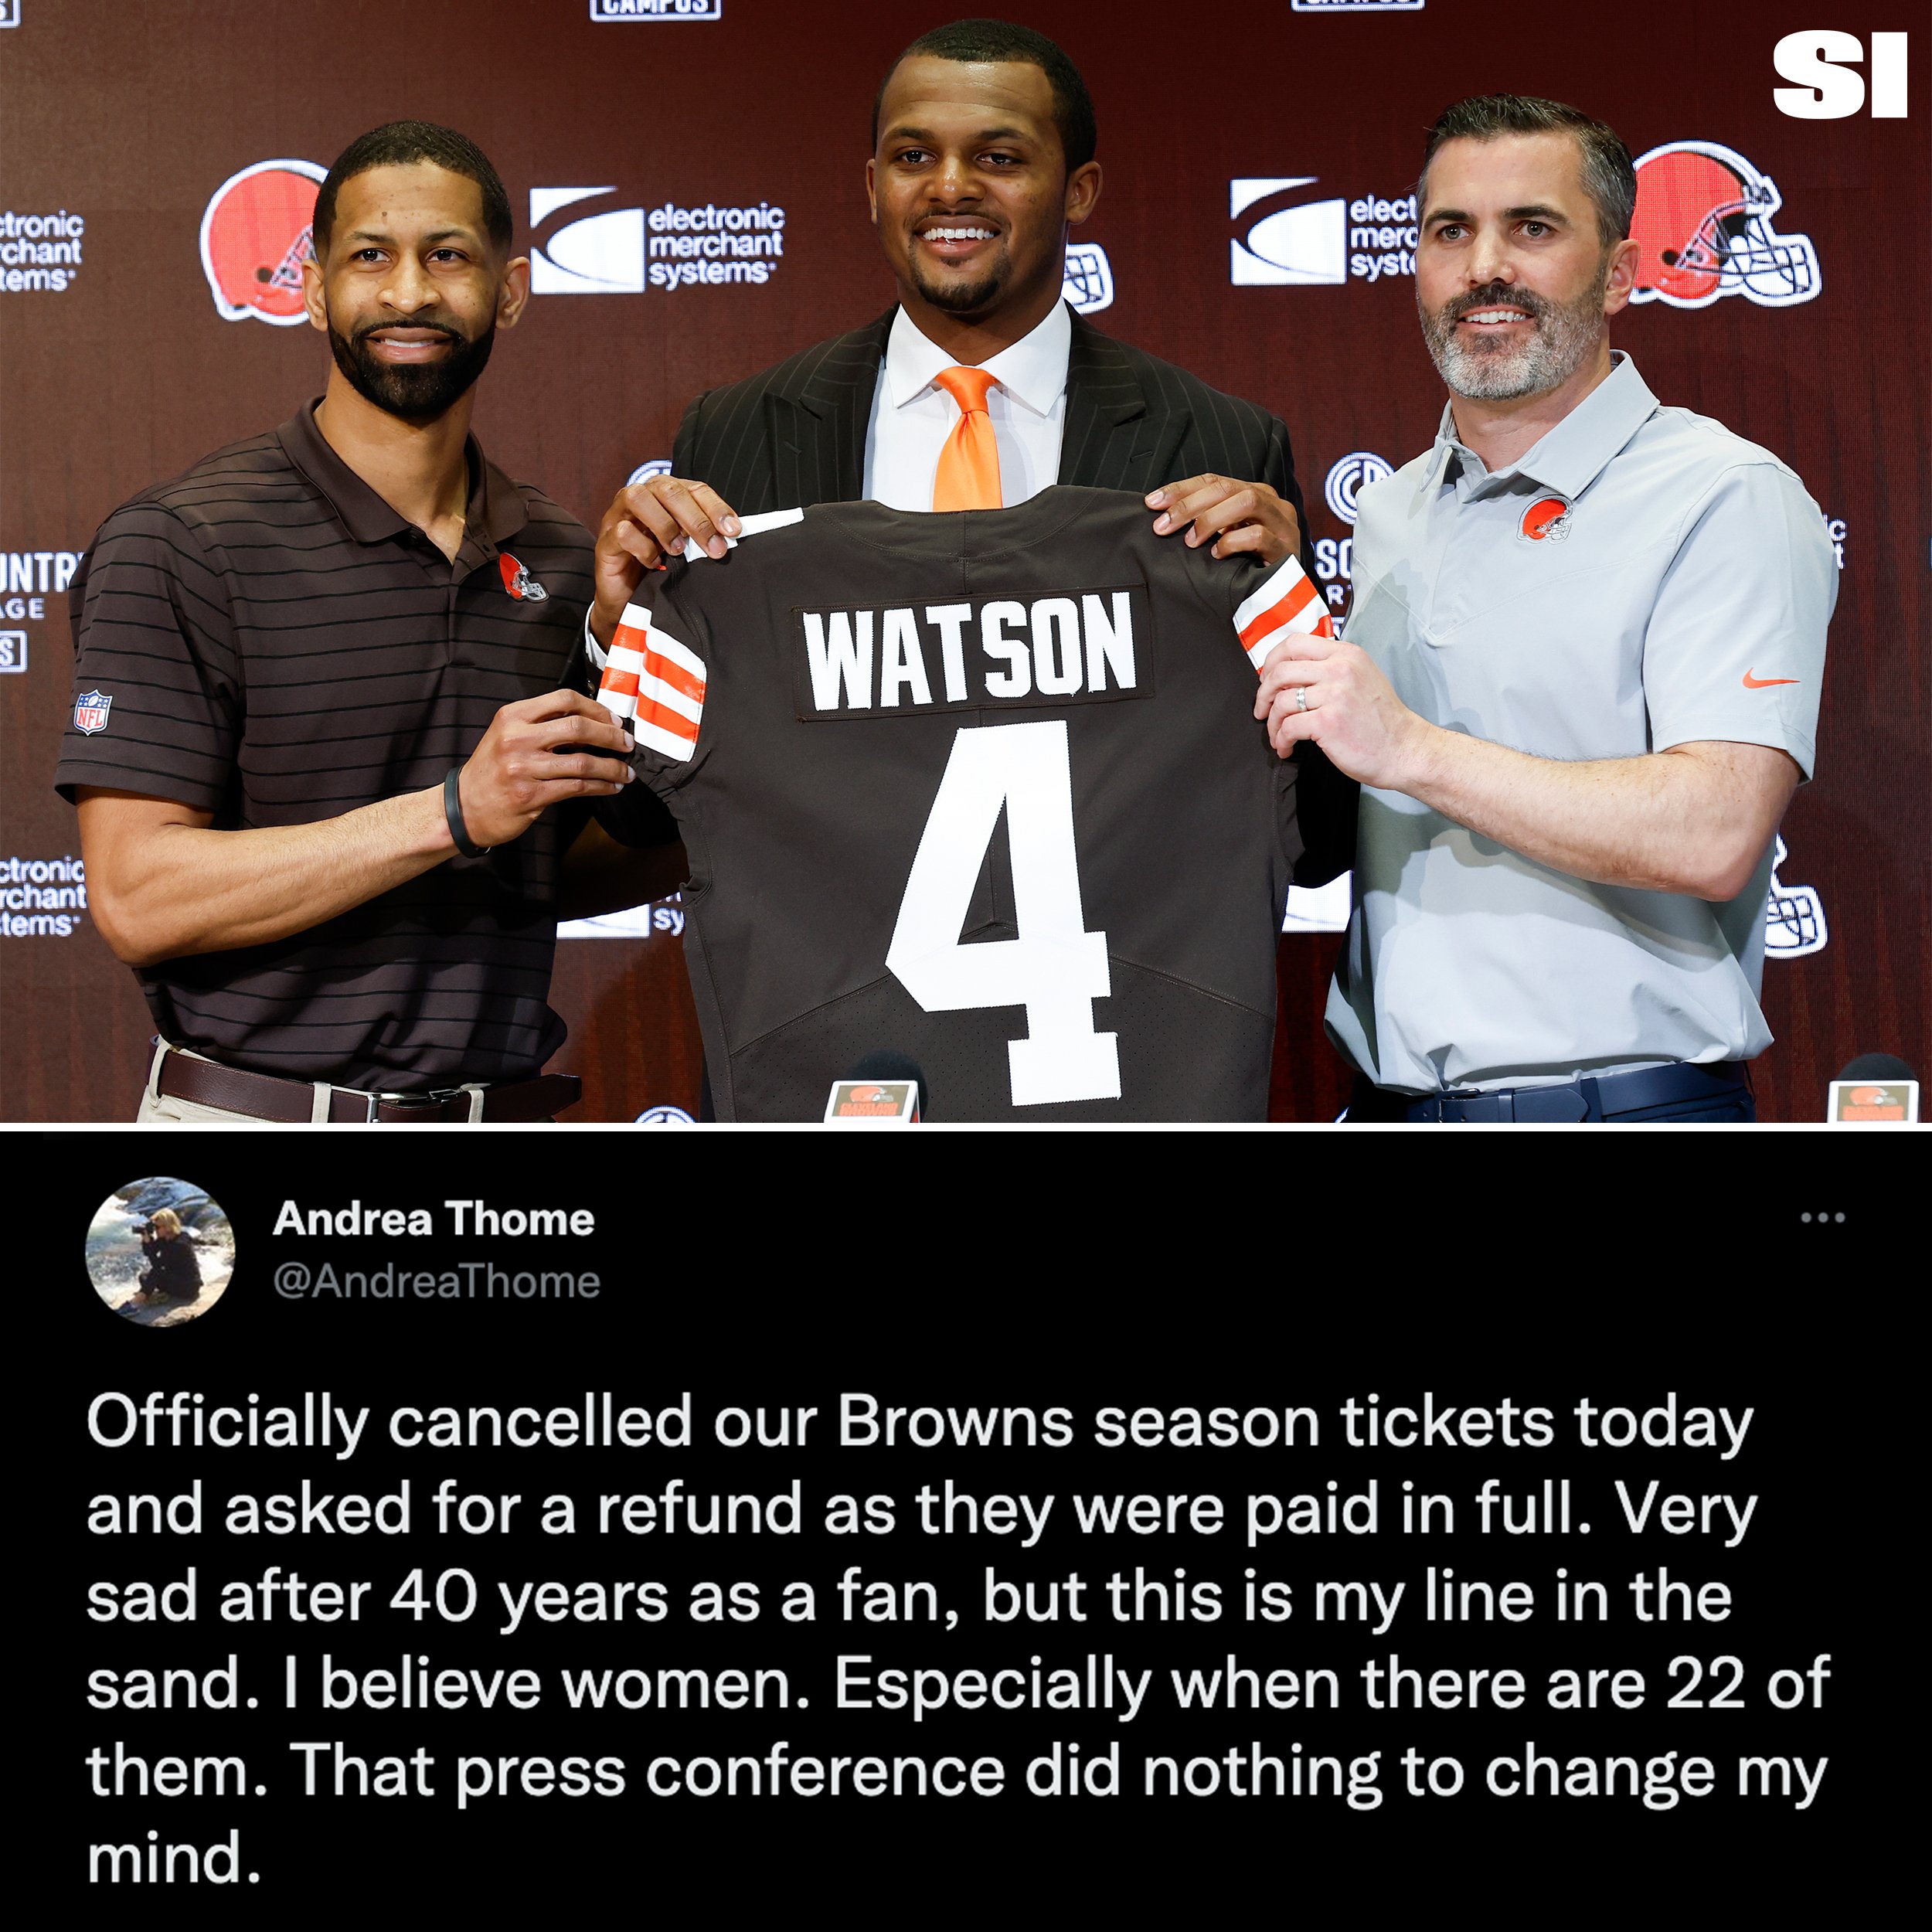 Sports Illustrated on X: Andrea Thome, the wife of Hall of Fame former  Cleveland baseball player Jim Thome, announced that her family canceled  their season tickets for Browns games Friday after the